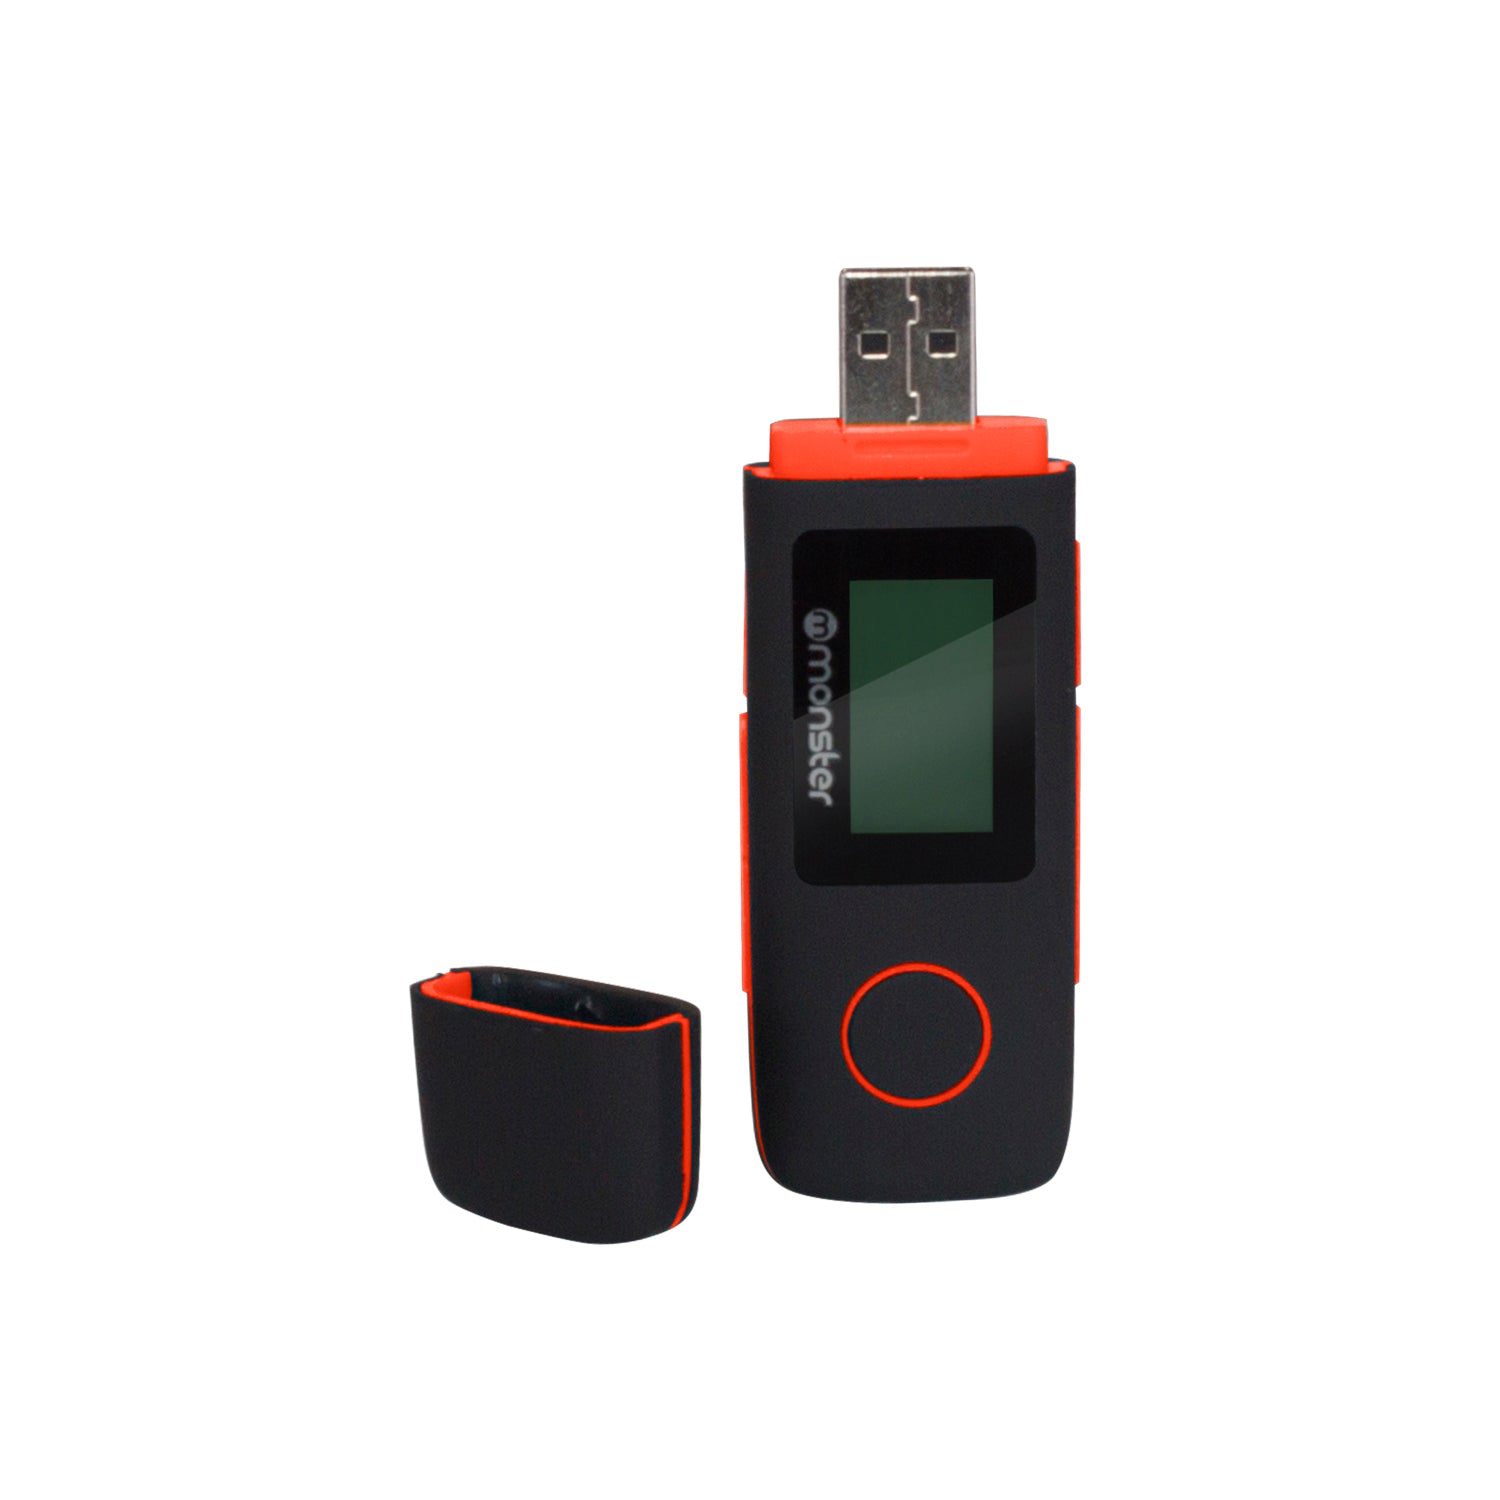 Reproductor MP3 Player 16GB Monster Audio